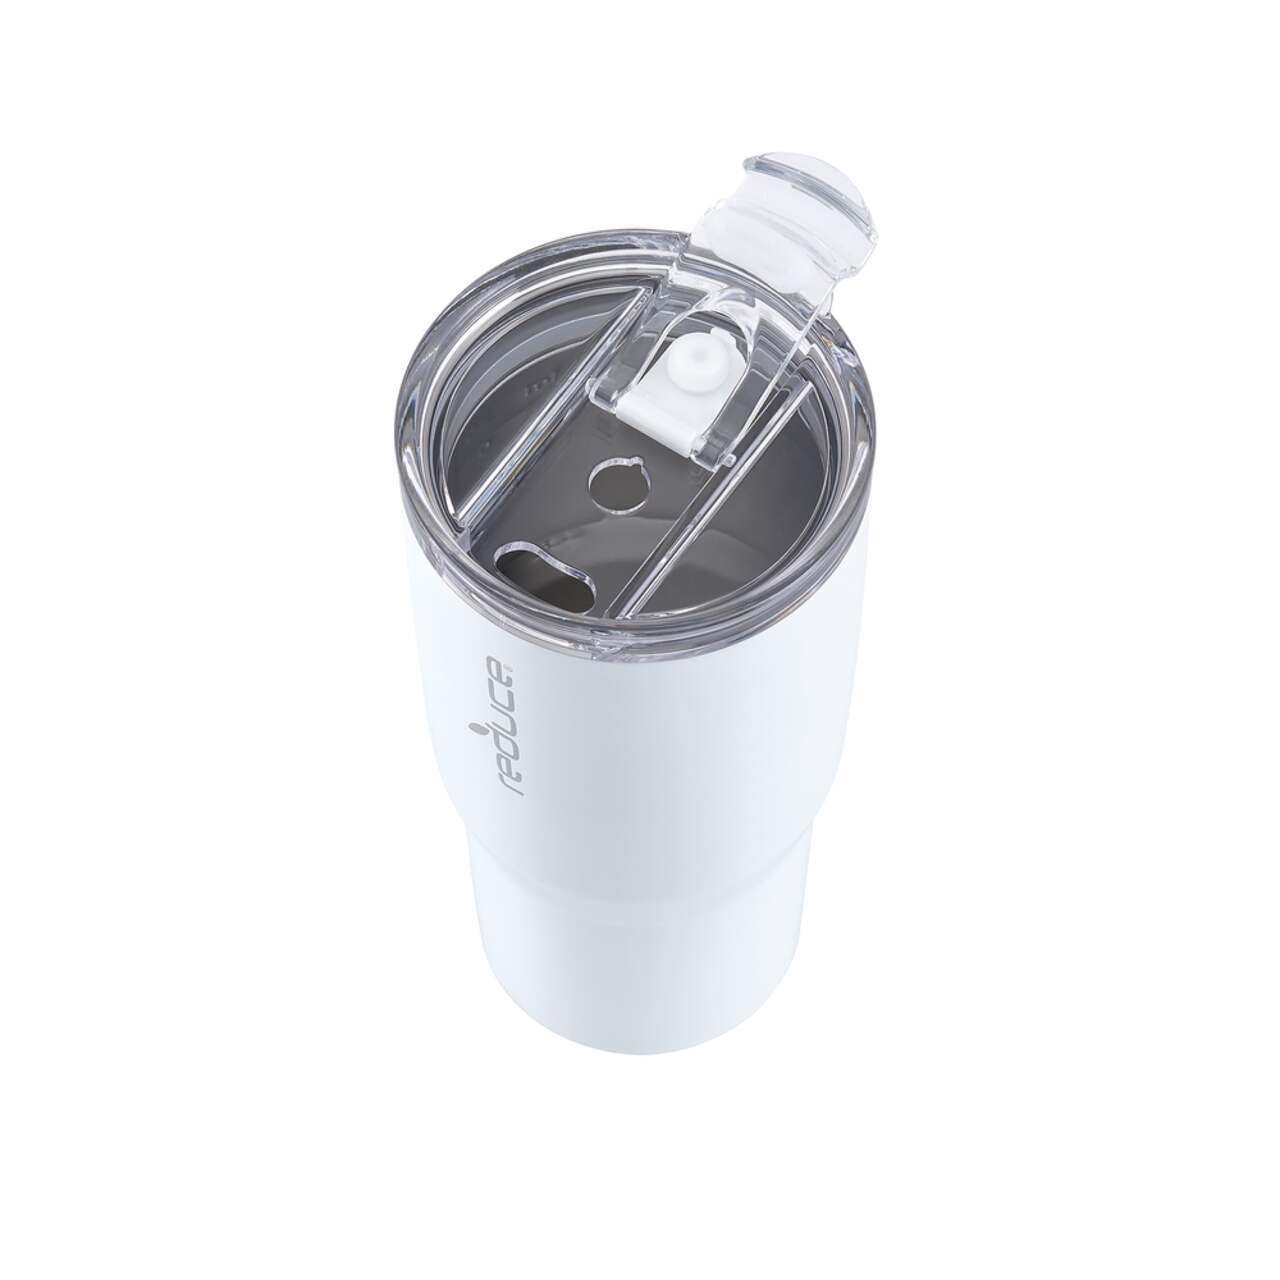 https://media-www.canadiantire.ca/product/living/kitchen/food-storage/1426434/reduce-3-in-1-tumbler-24oz-white-614b35b9-7de6-41b2-8e0a-231fcc9efac8.png?imdensity=1&imwidth=1244&impolicy=mZoom